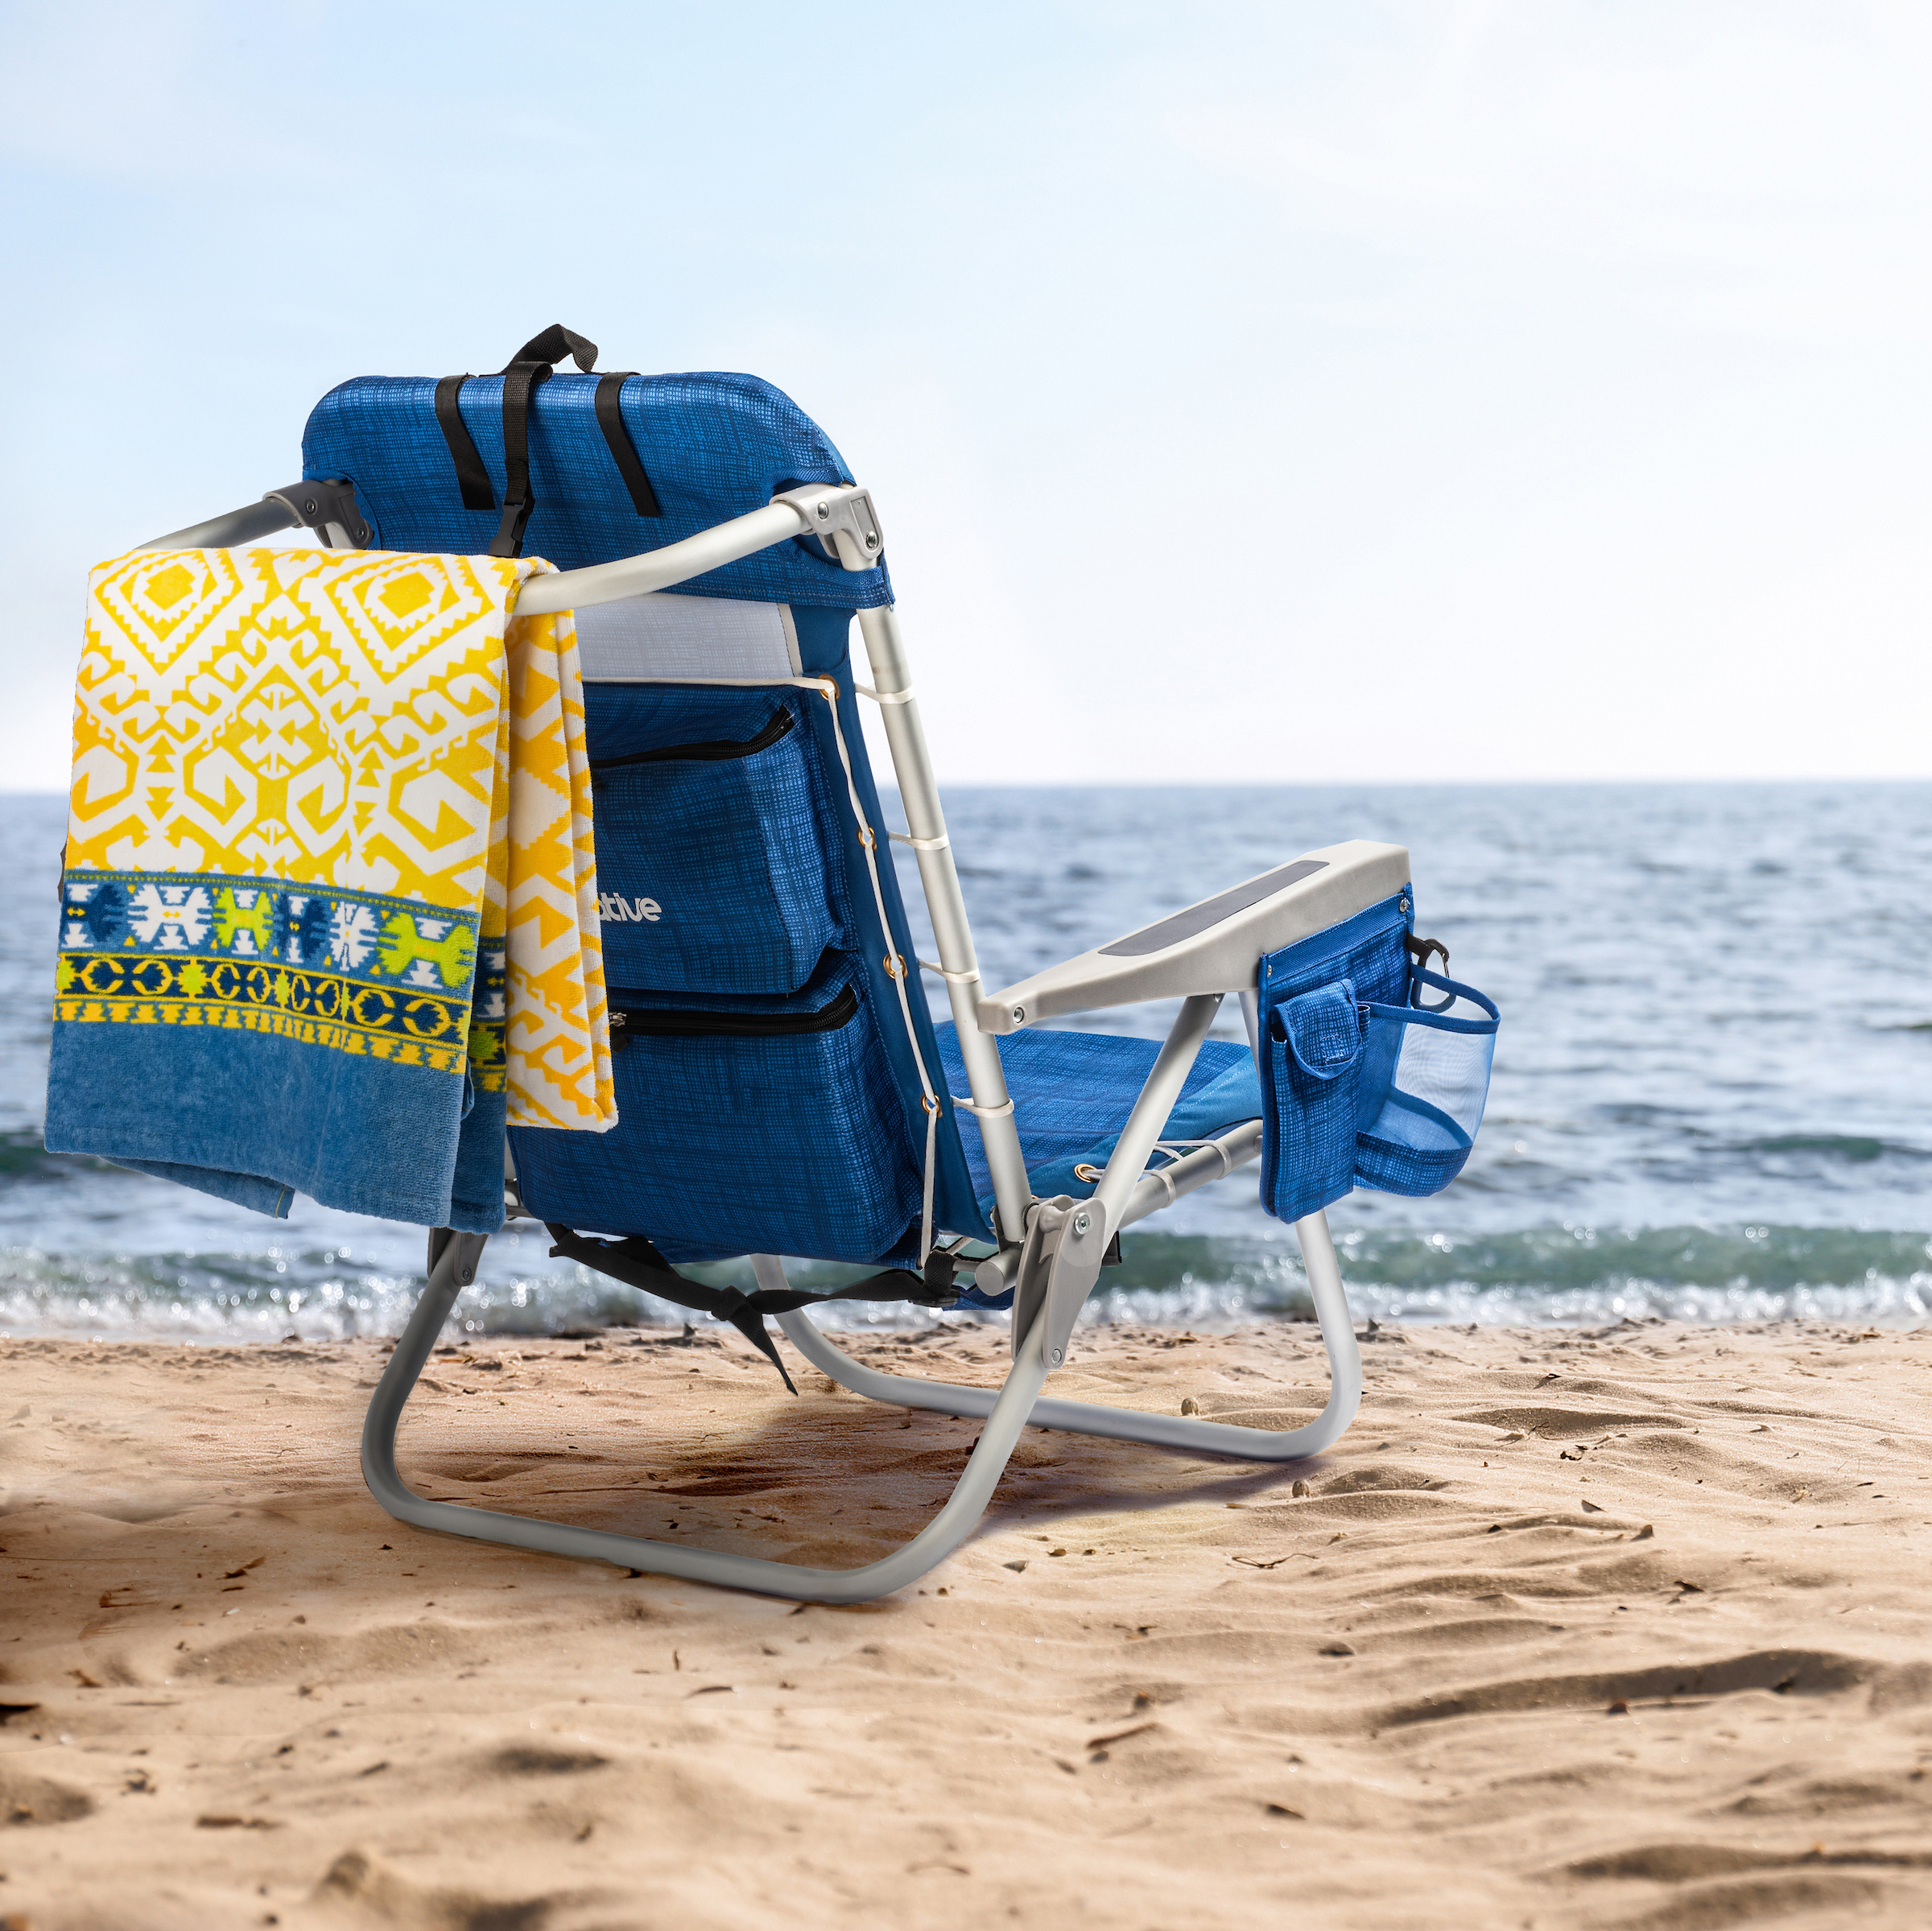 Homevative Folding Backpack Beach Chair with 5 Positions, Towel Bar, Blue - image 4 of 5